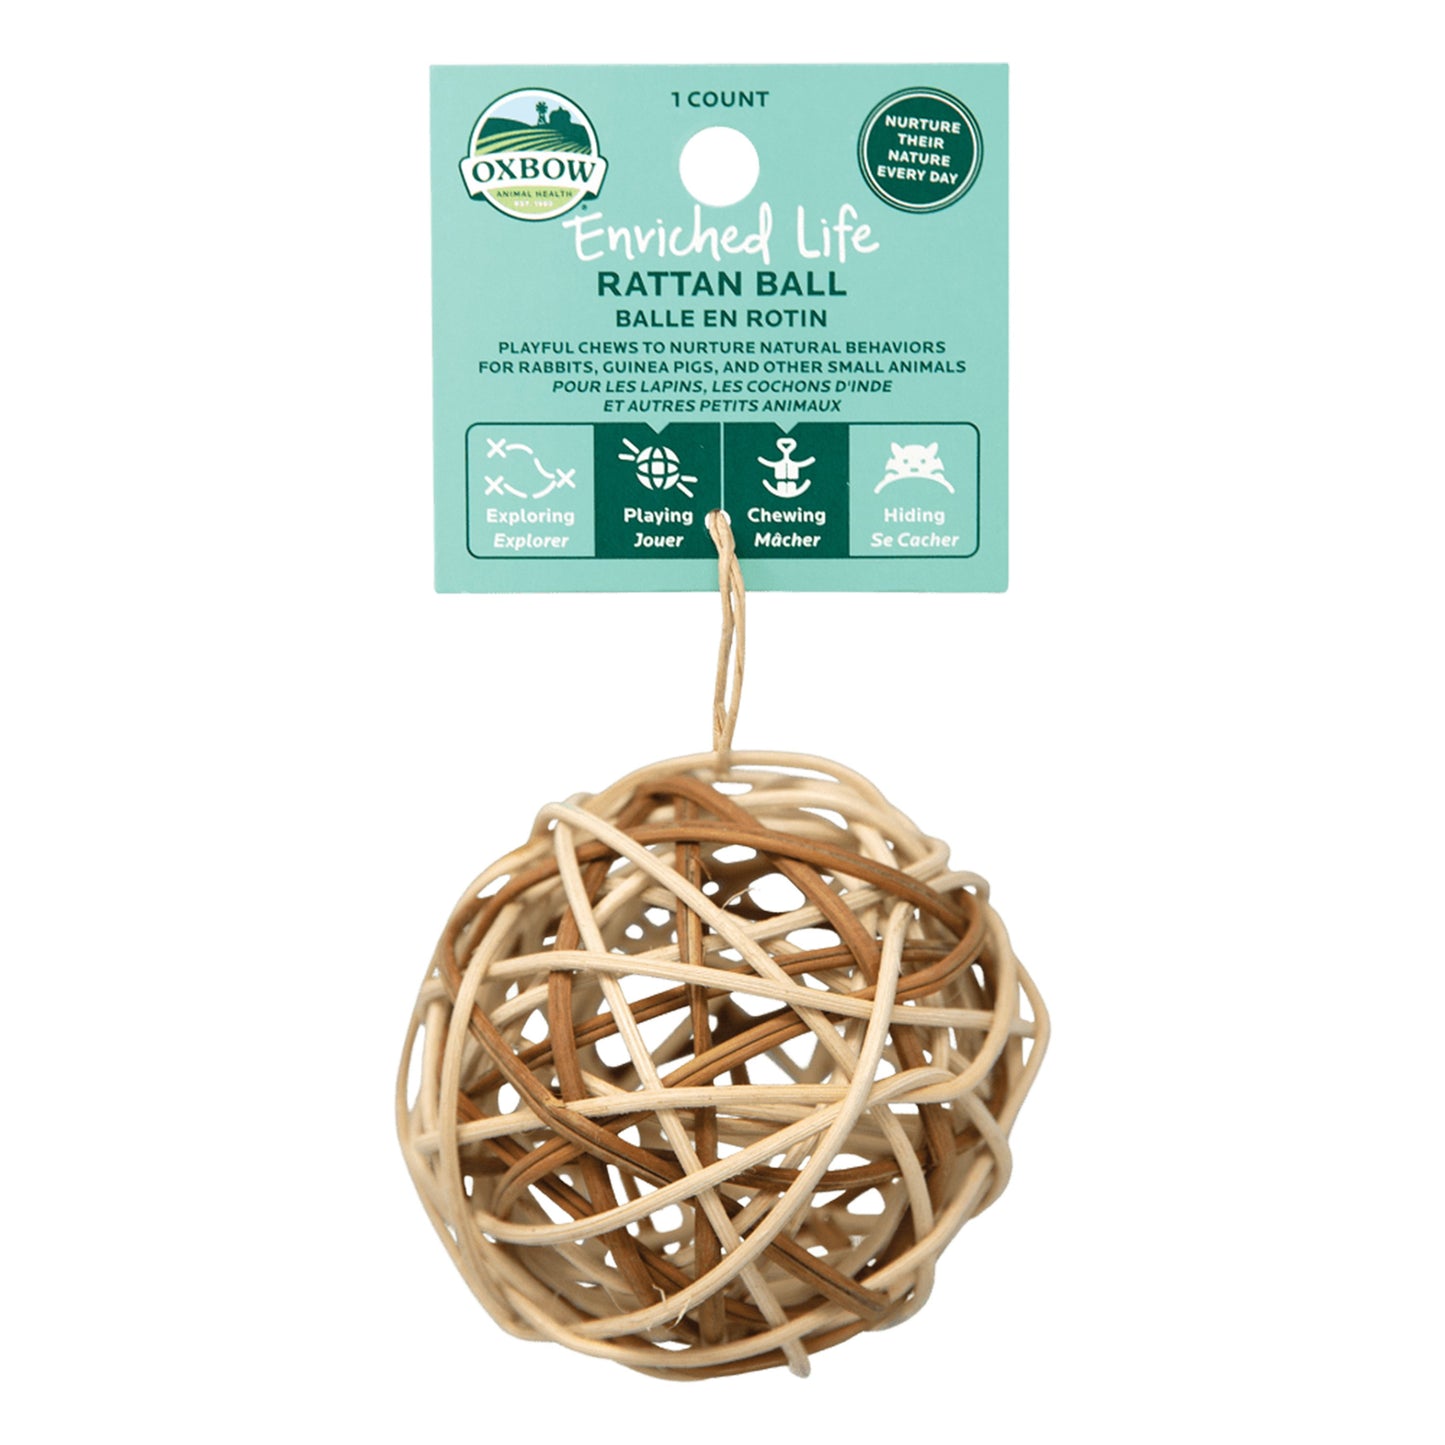 Oxbow Animal Health Enriched Life Rattan Ball Small Animal Toy, One Size, Oxbow